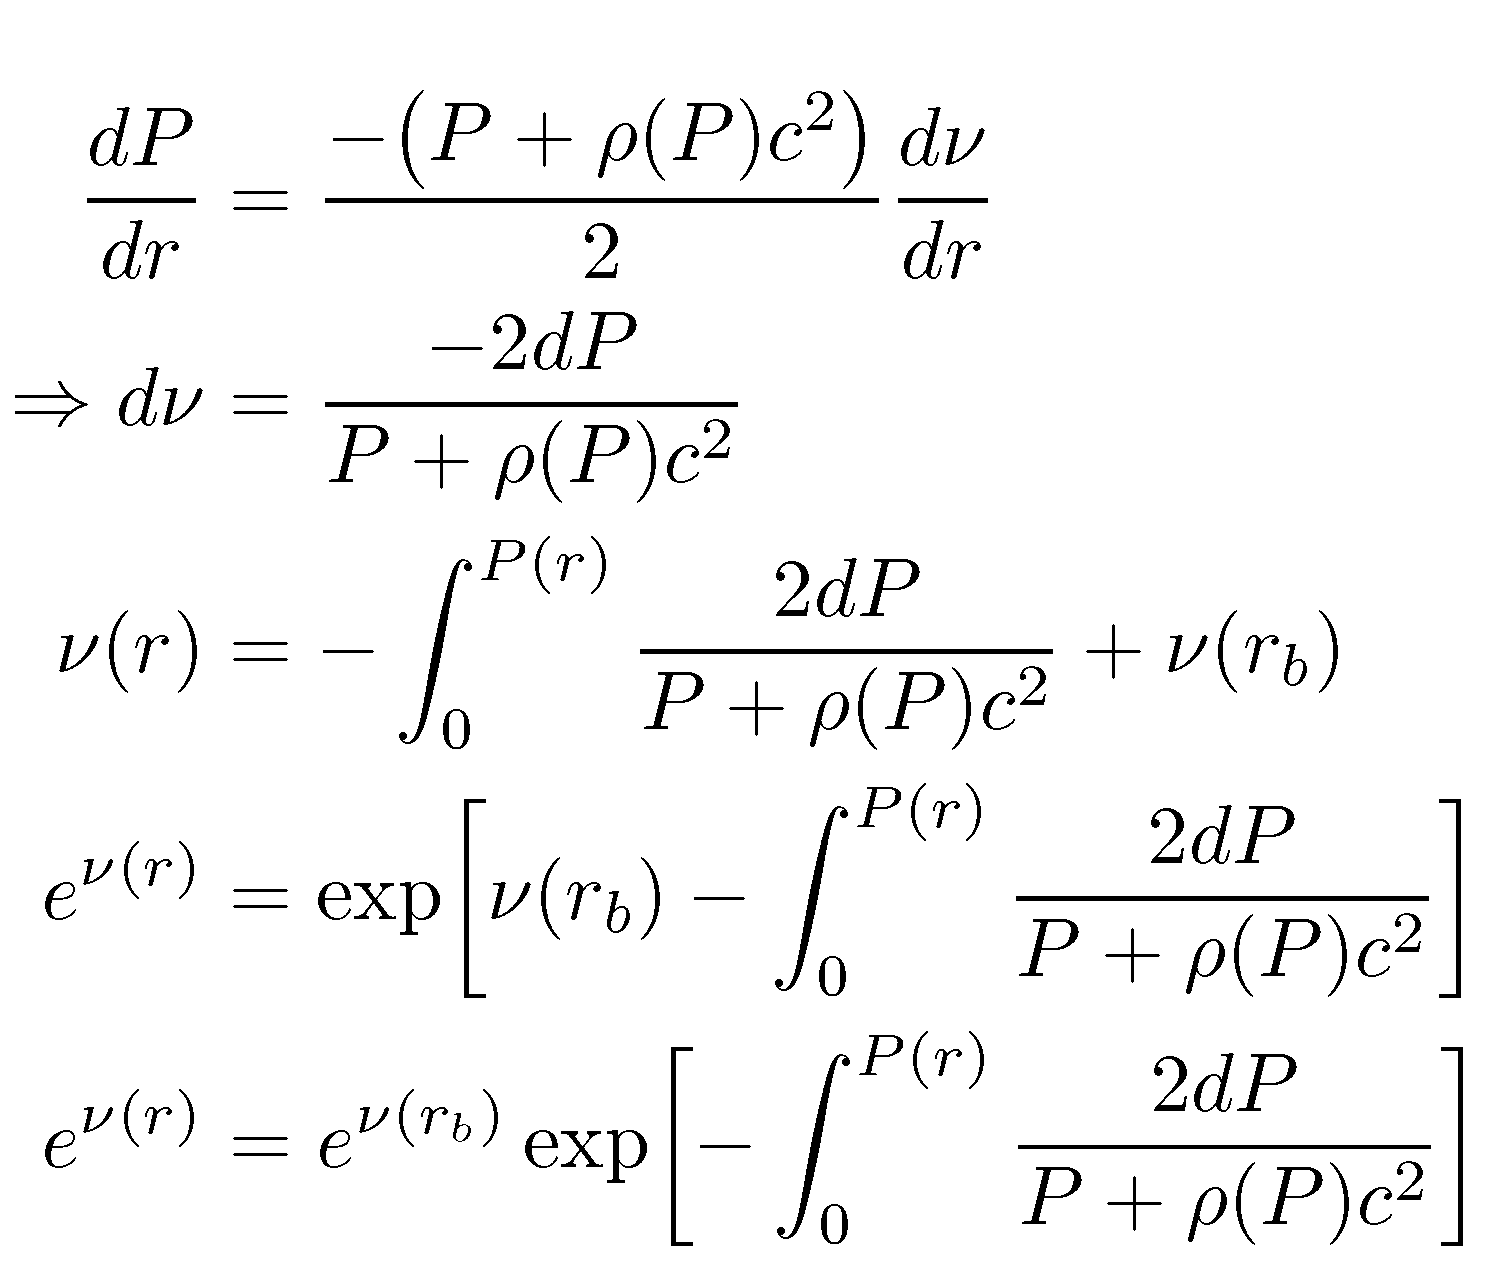 How do I align these equations?